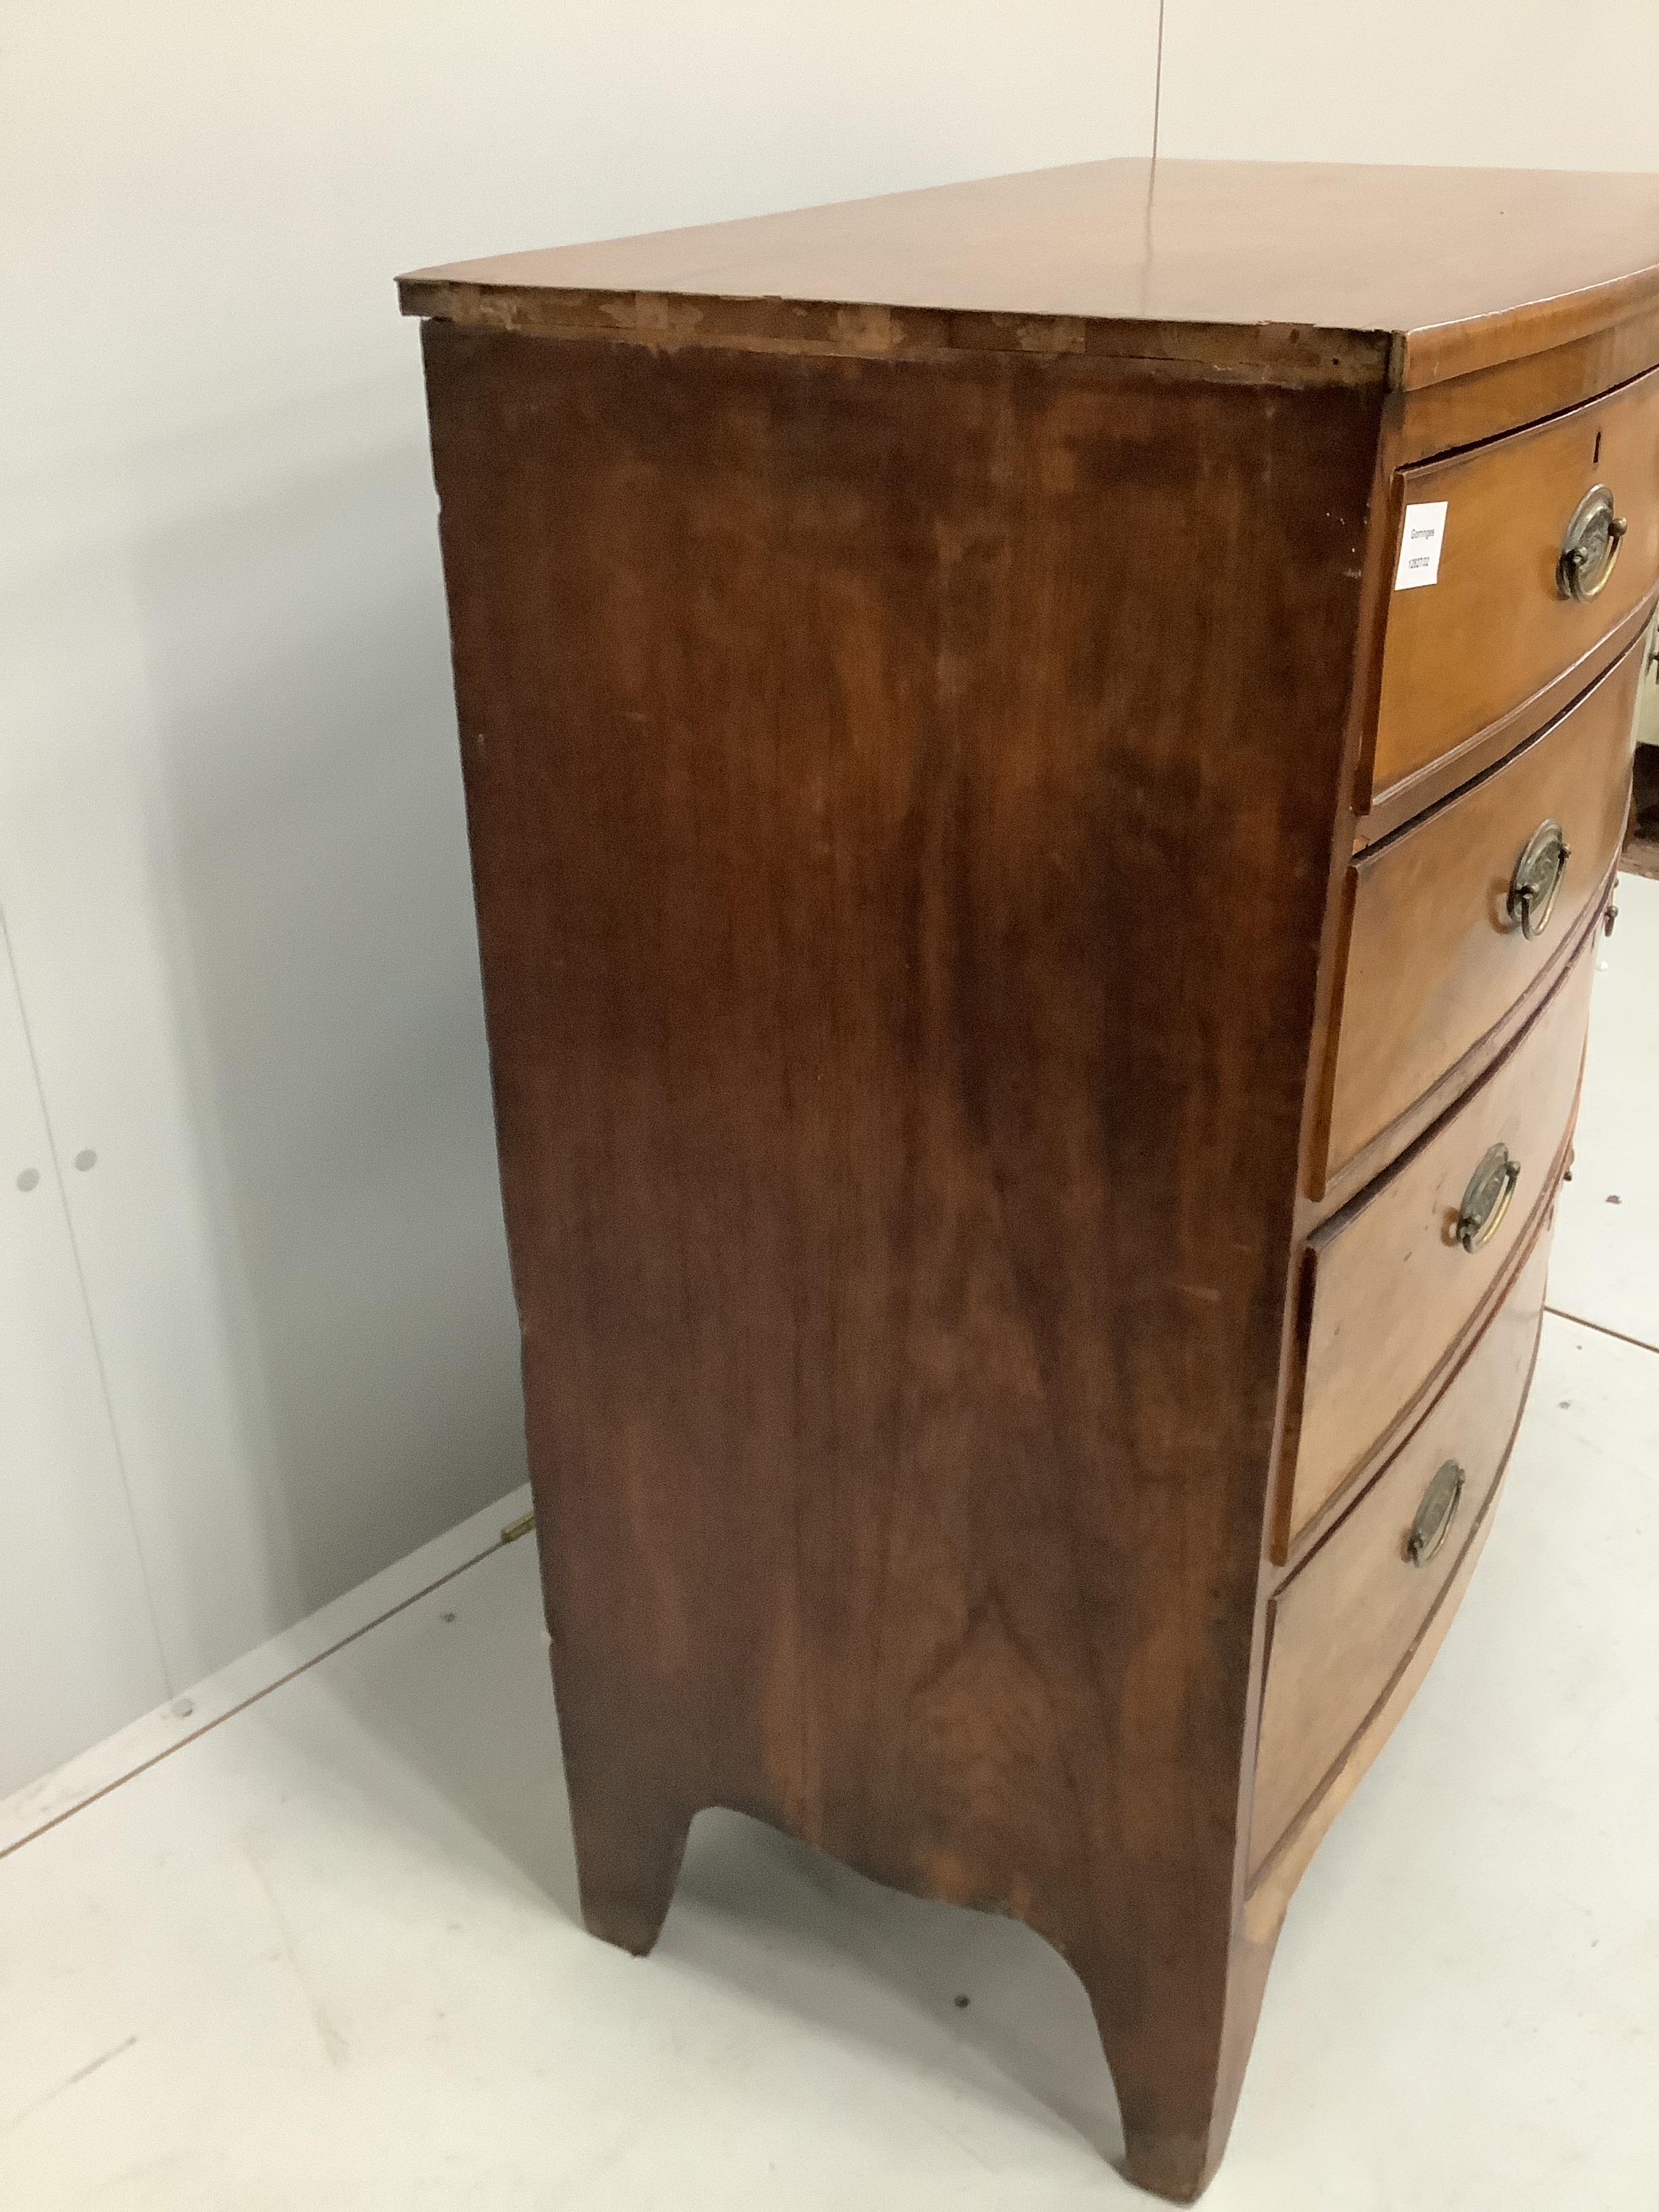 A Regency mahogany bow fronted chest of drawers, width 102cm, depth 51cm, height 104cm